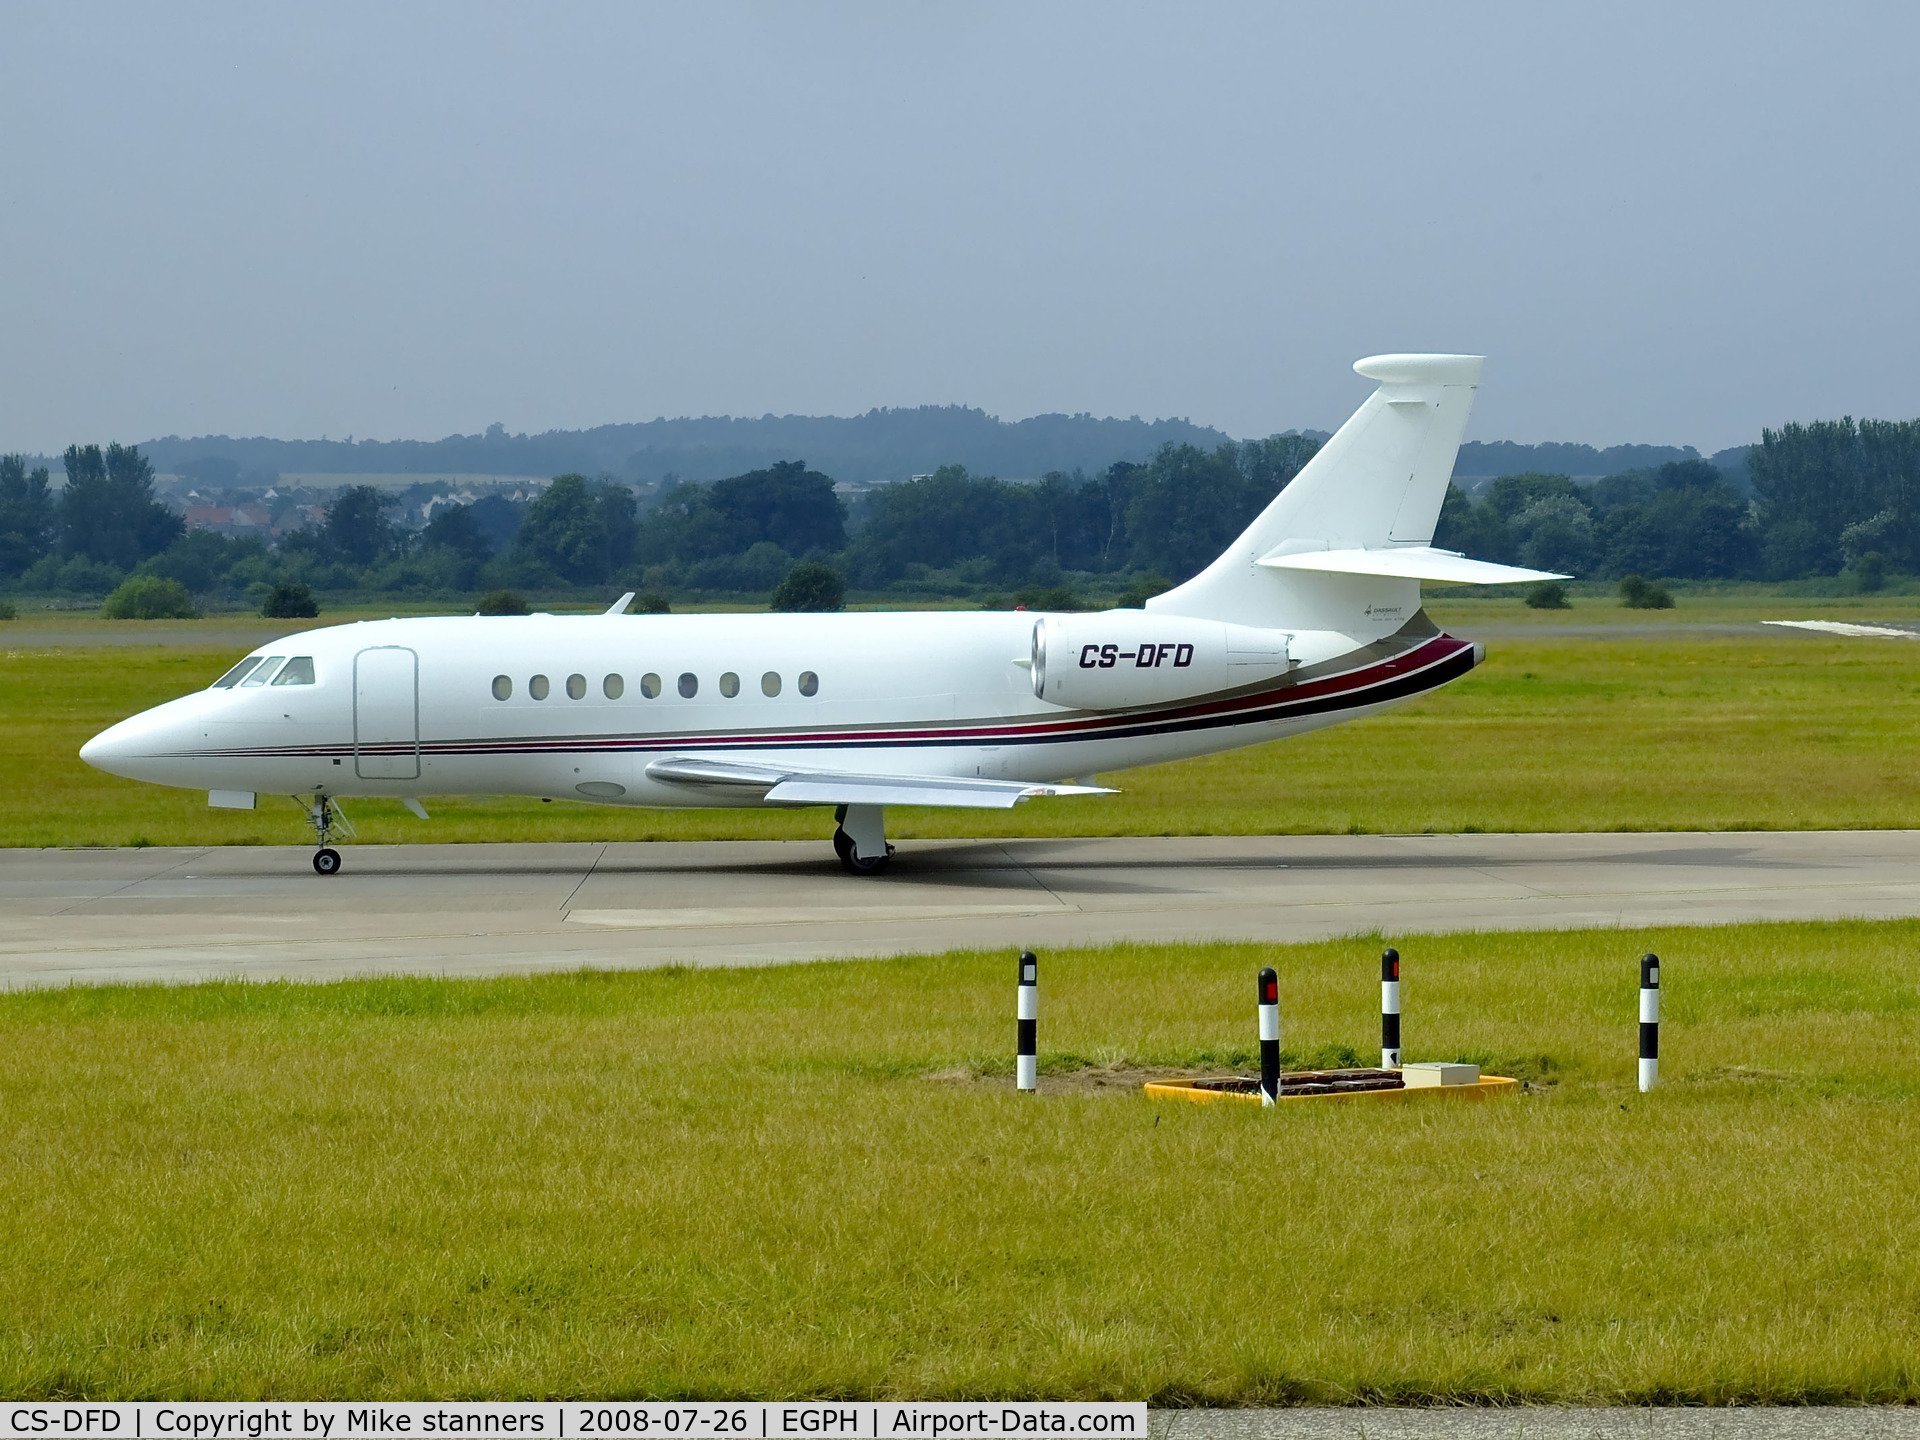 CS-DFD, 2001 Dassault Falcon 2000 C/N 174, Netjets Falcon 2000 taxiing to RWY06